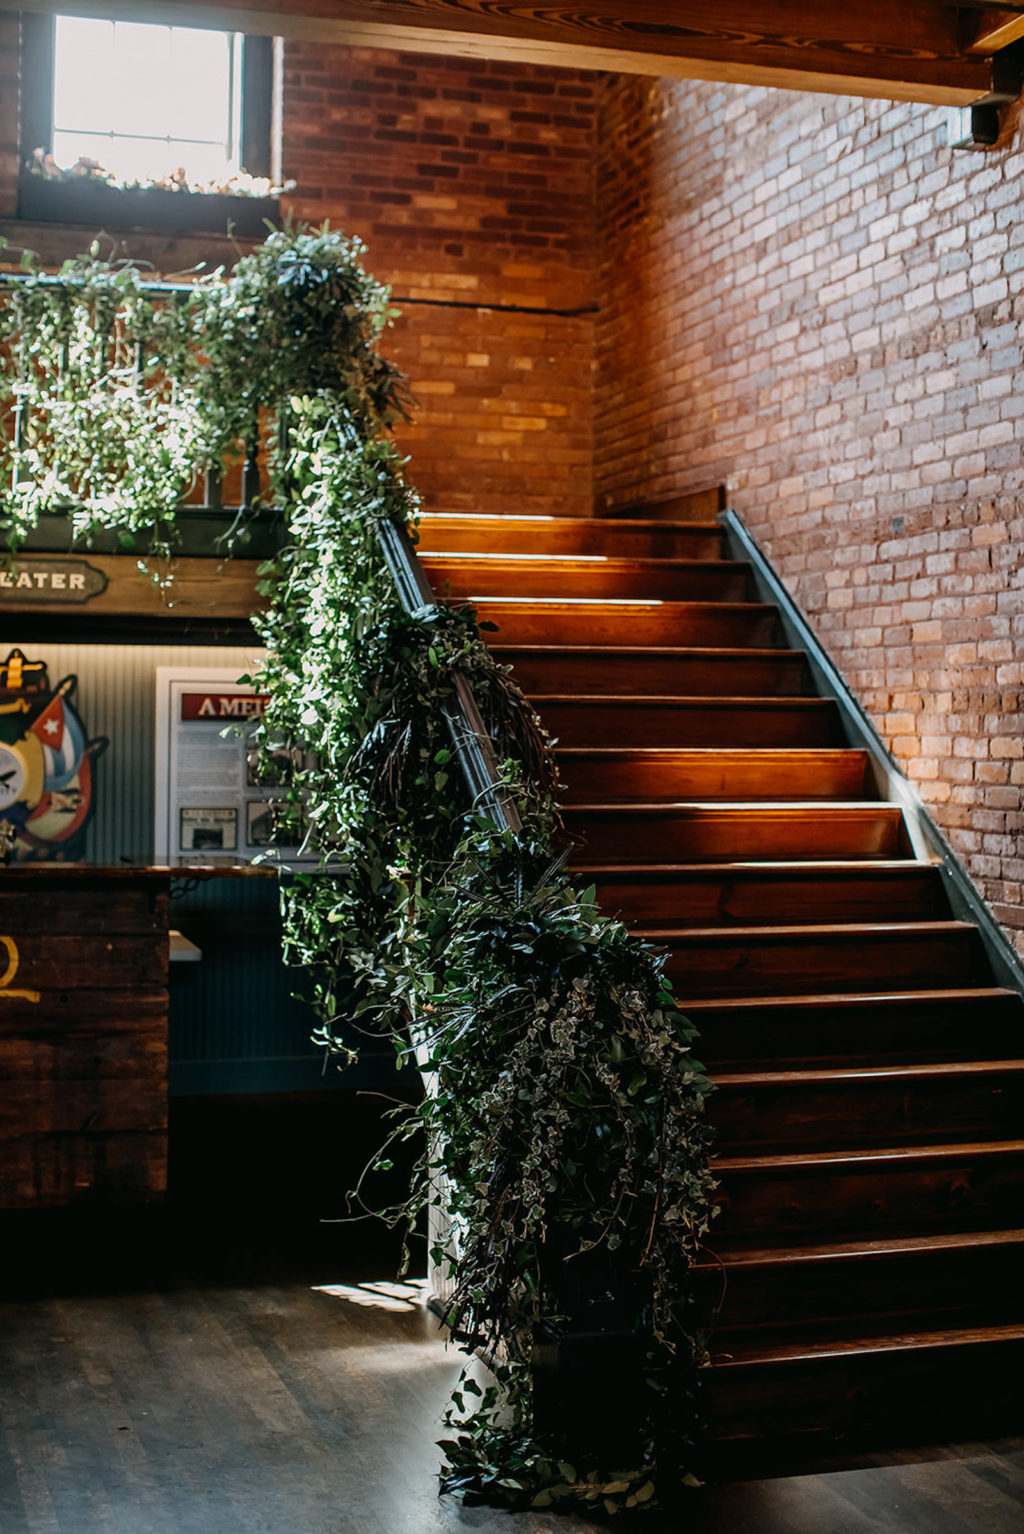 Vintage Inspired Tampa Bay Wedding Venue and Decor, Industrial Exposed Brick with Staircase decorated with Cascading Greenery, Ivy and Vines Wrapped Around Staircase | Unique Florida Wedding Venue J.C. Newman Cigar Co. in Ybor City